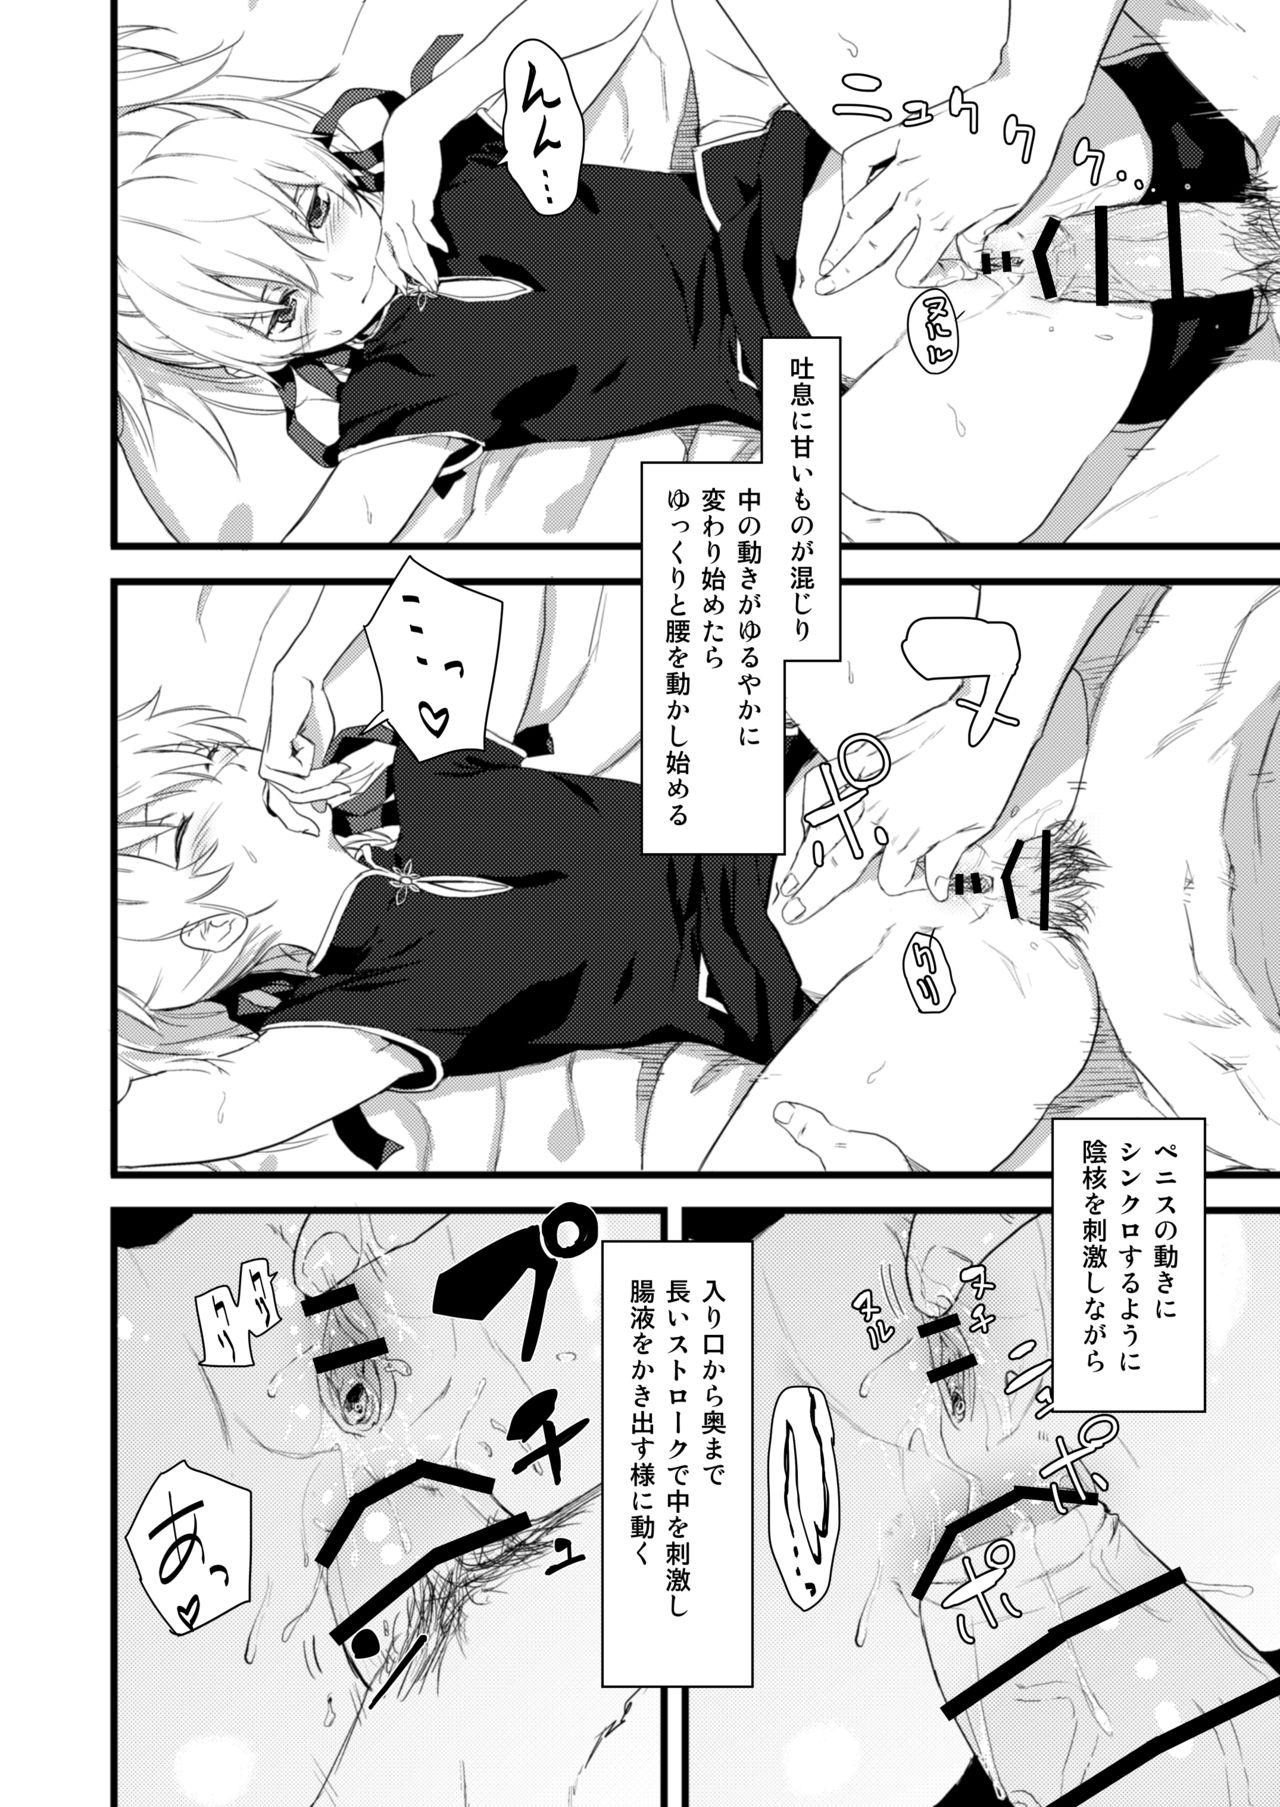 Private おしりで銀ちゃん本 - Darker than black Harcore - Page 7